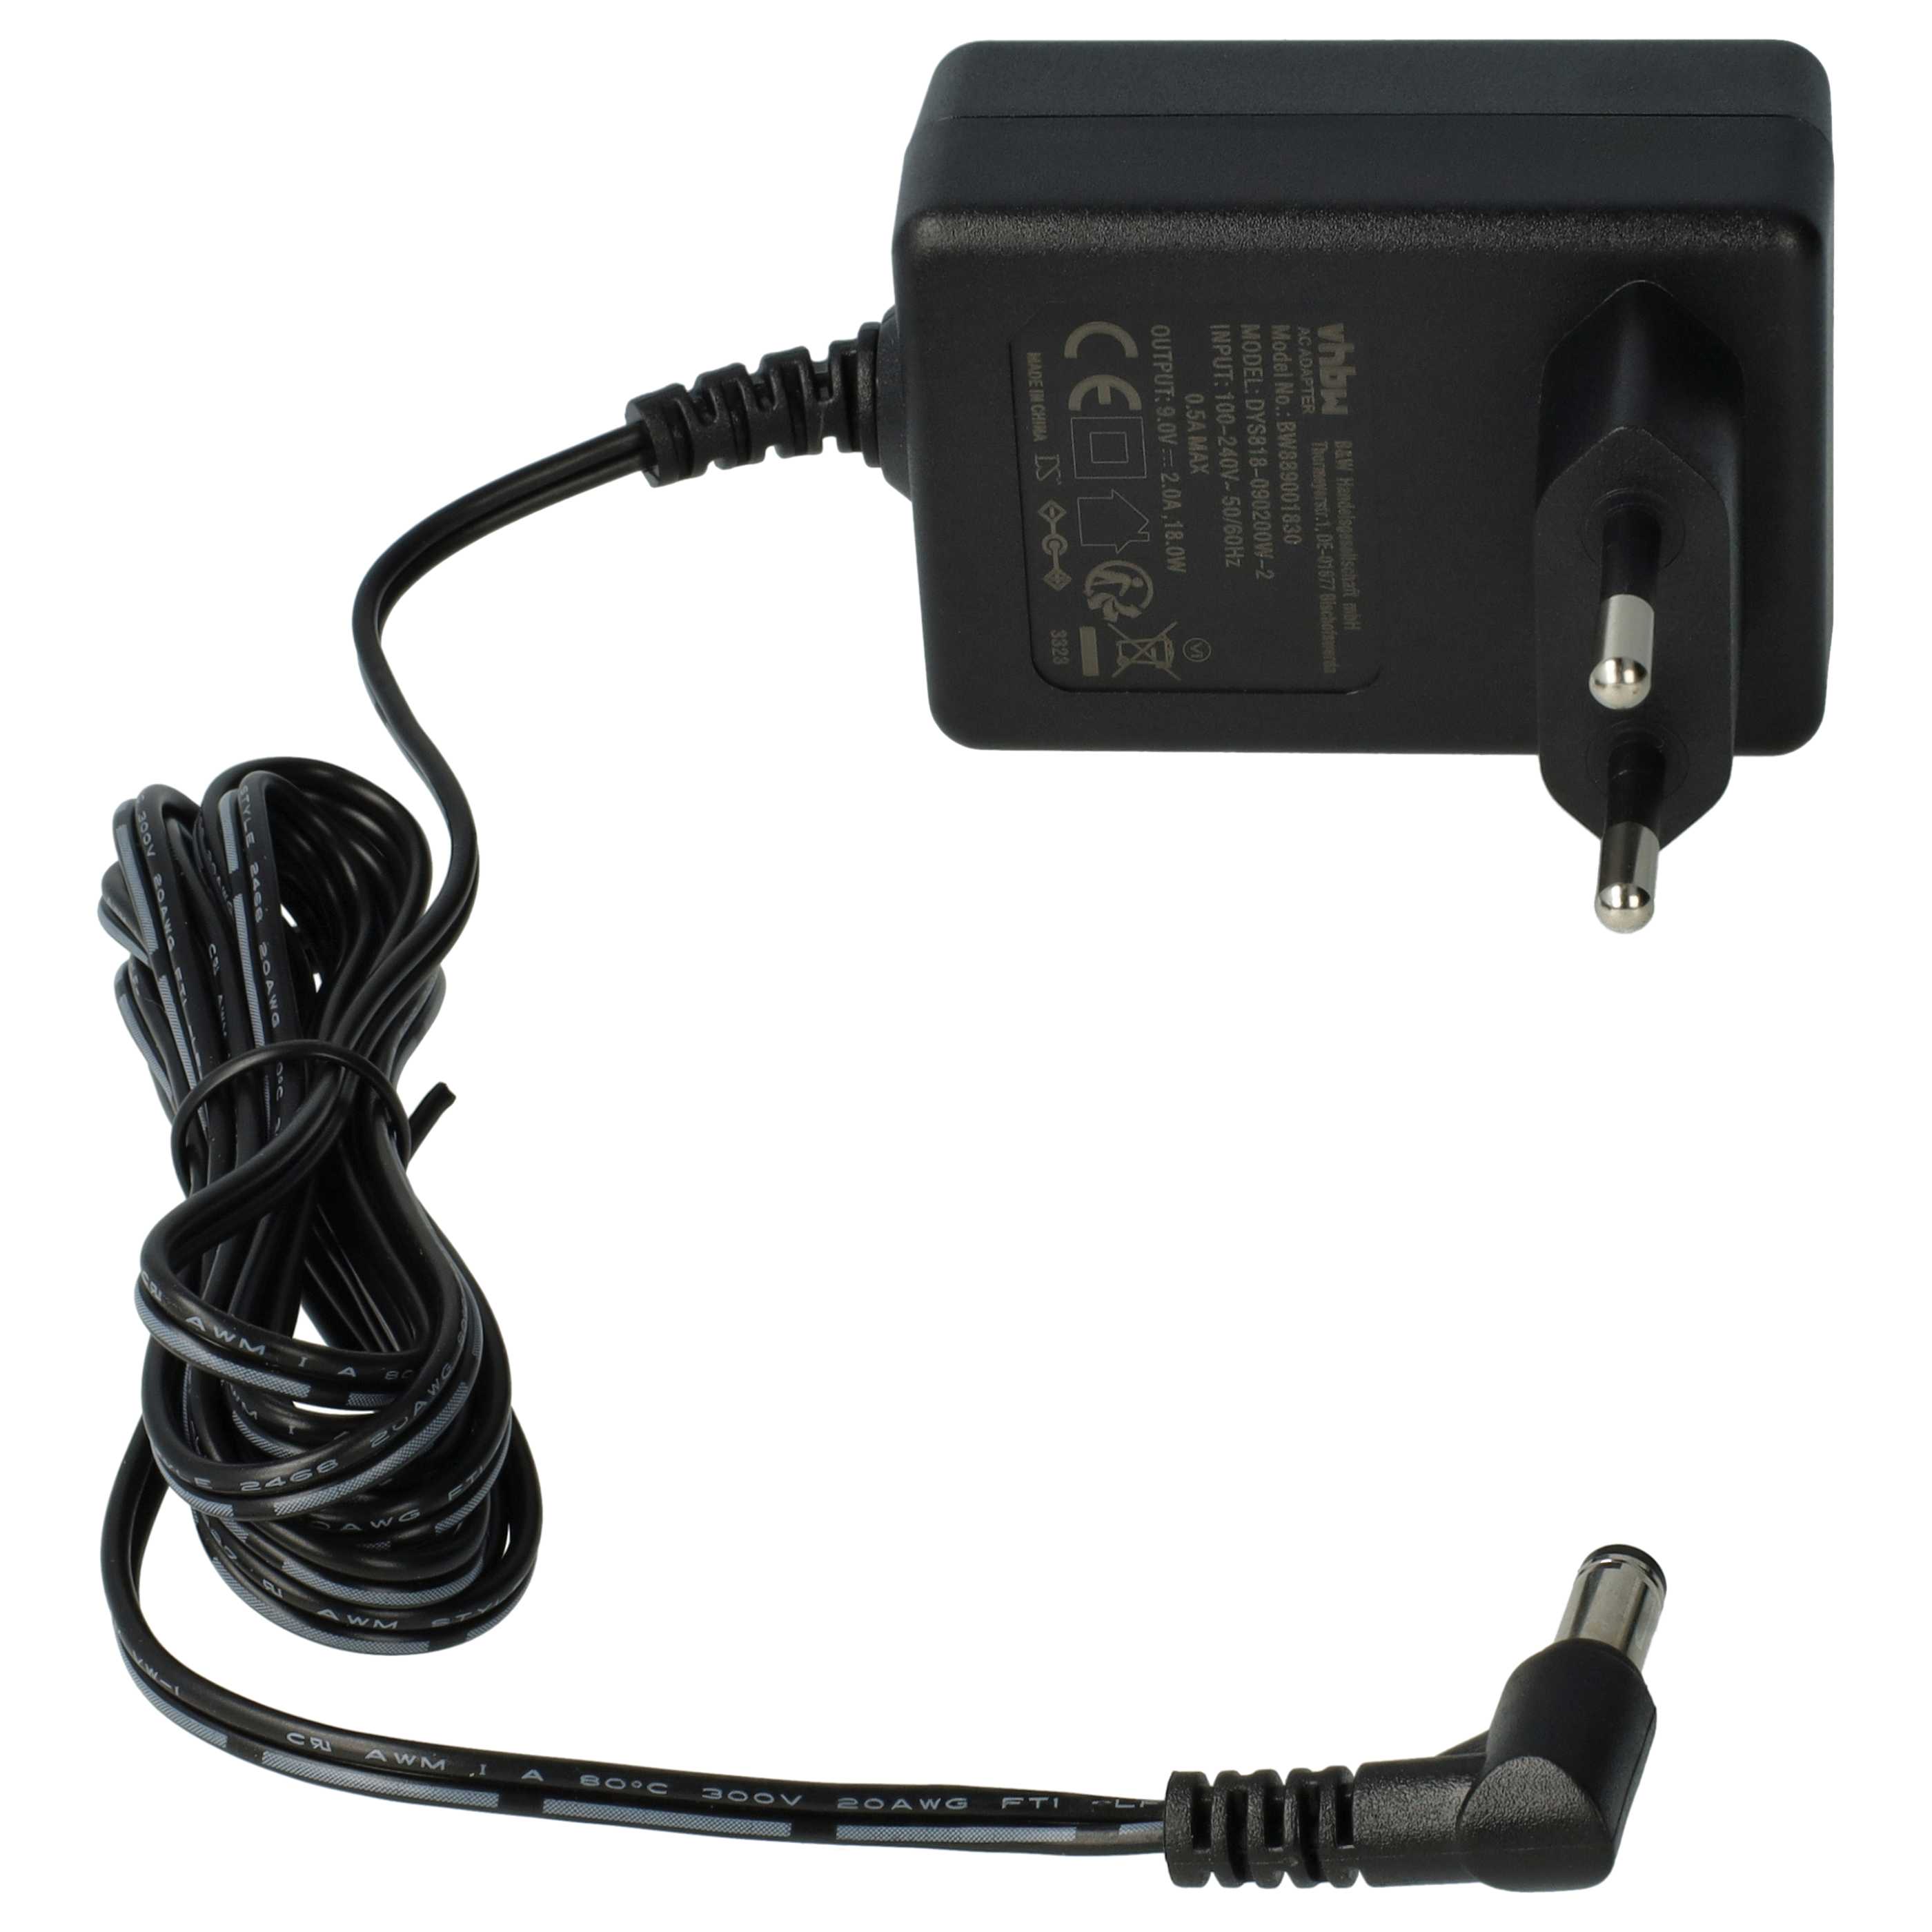 Mains Power Adapter replaces Soehnle 618.020.070 for Soehnle Professional Bench Scales, Platform Scales